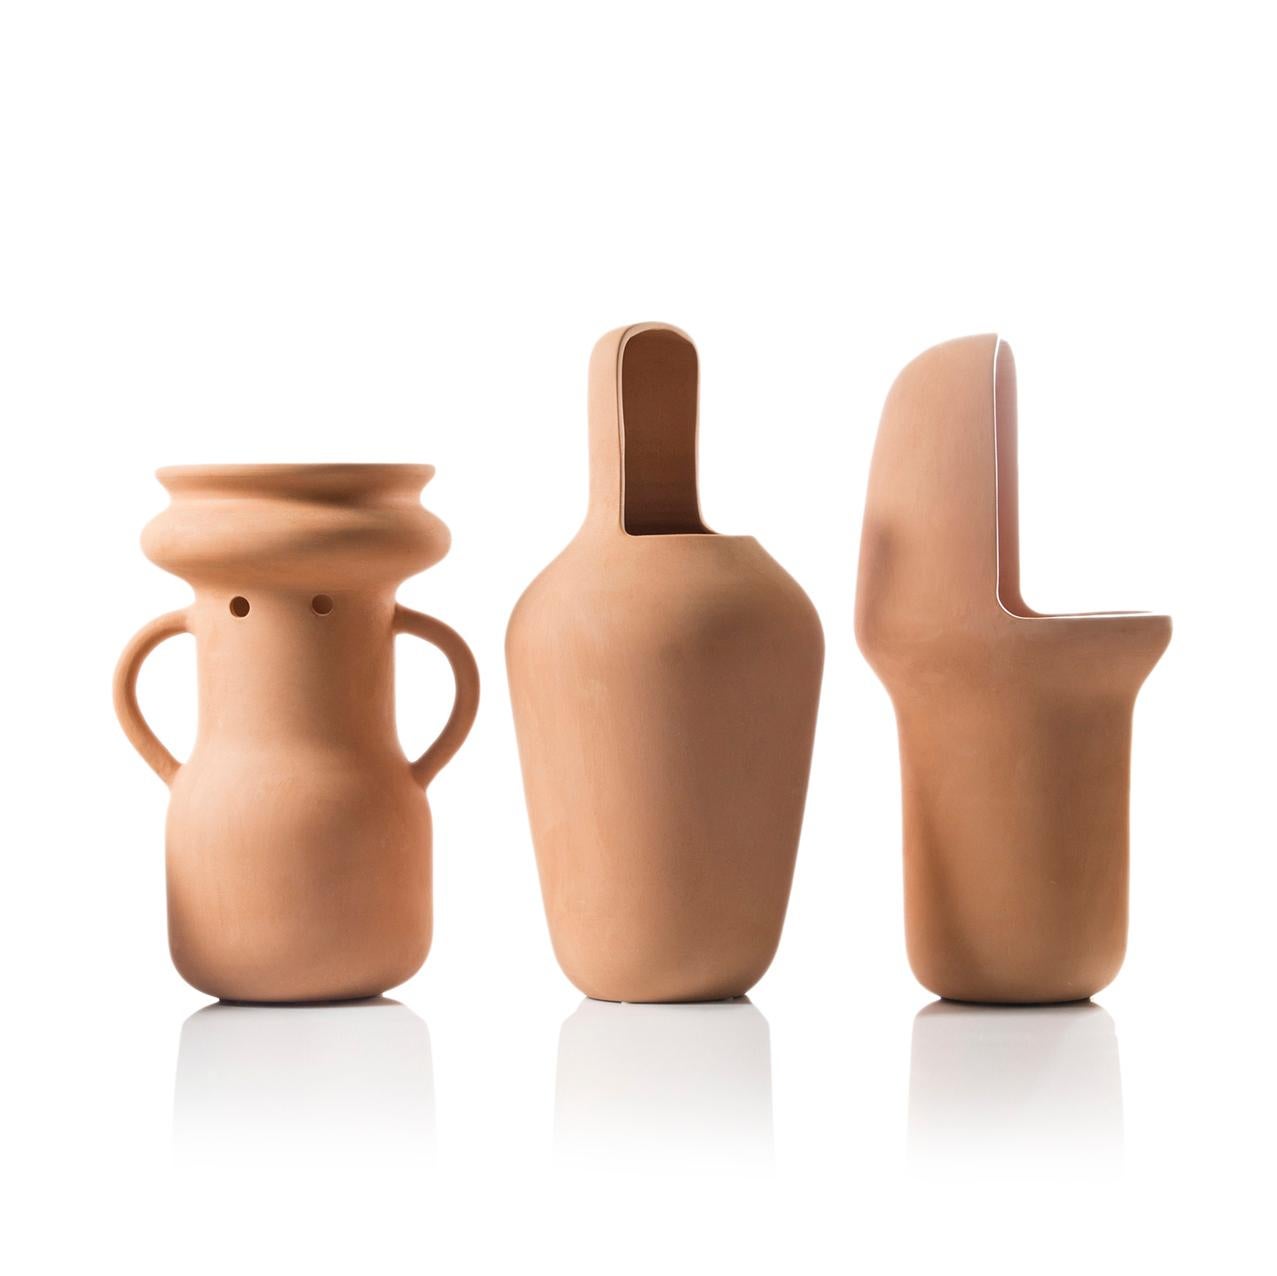 Jaime Hayon Contemporary Terracotta Set of Gardenias Big Vases In New Condition For Sale In Barcelona, Barcelona